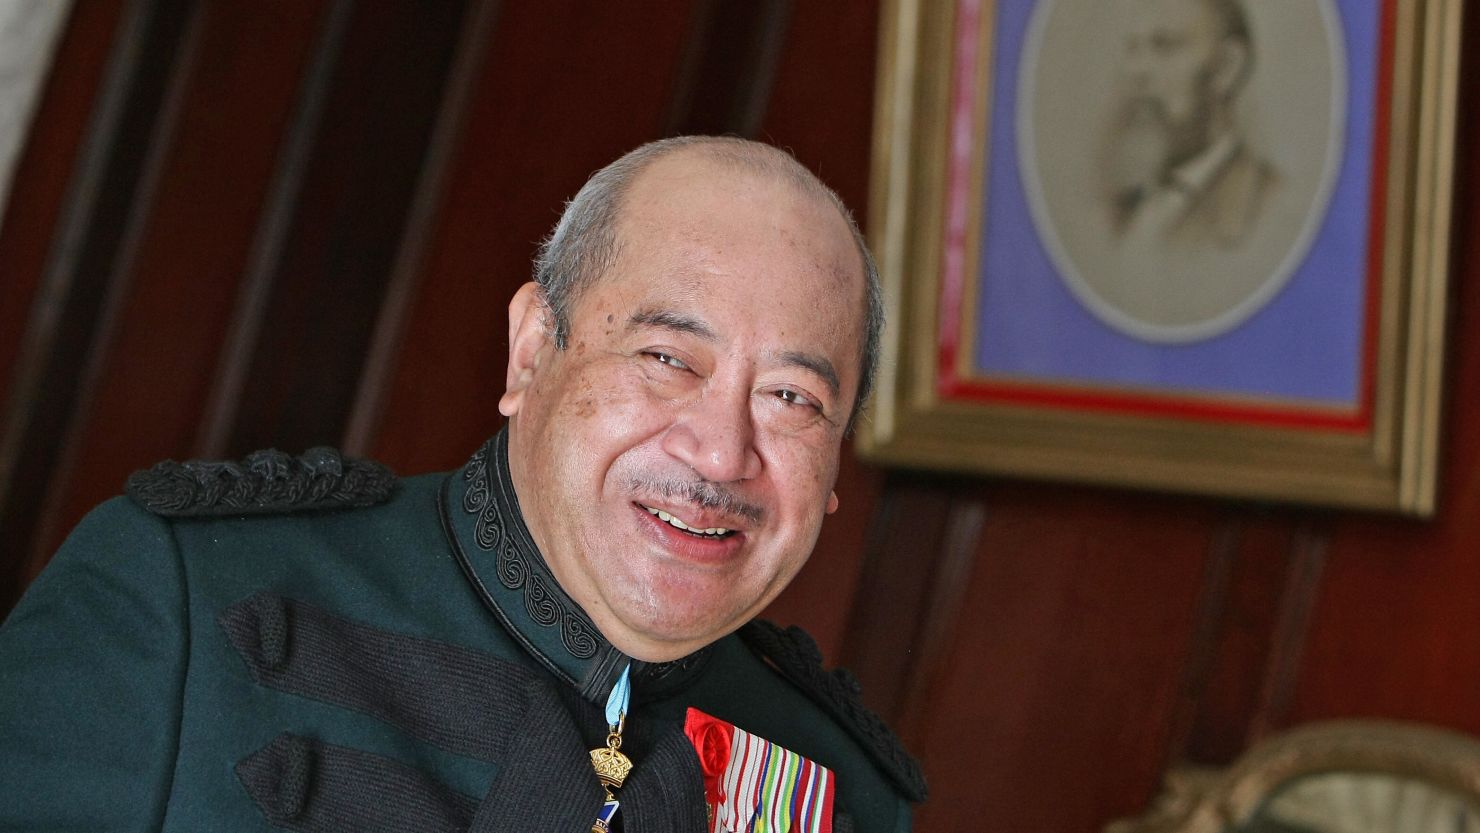 King George Tupou V had been monarch of the South Pacific nation of Tonga since 2006.